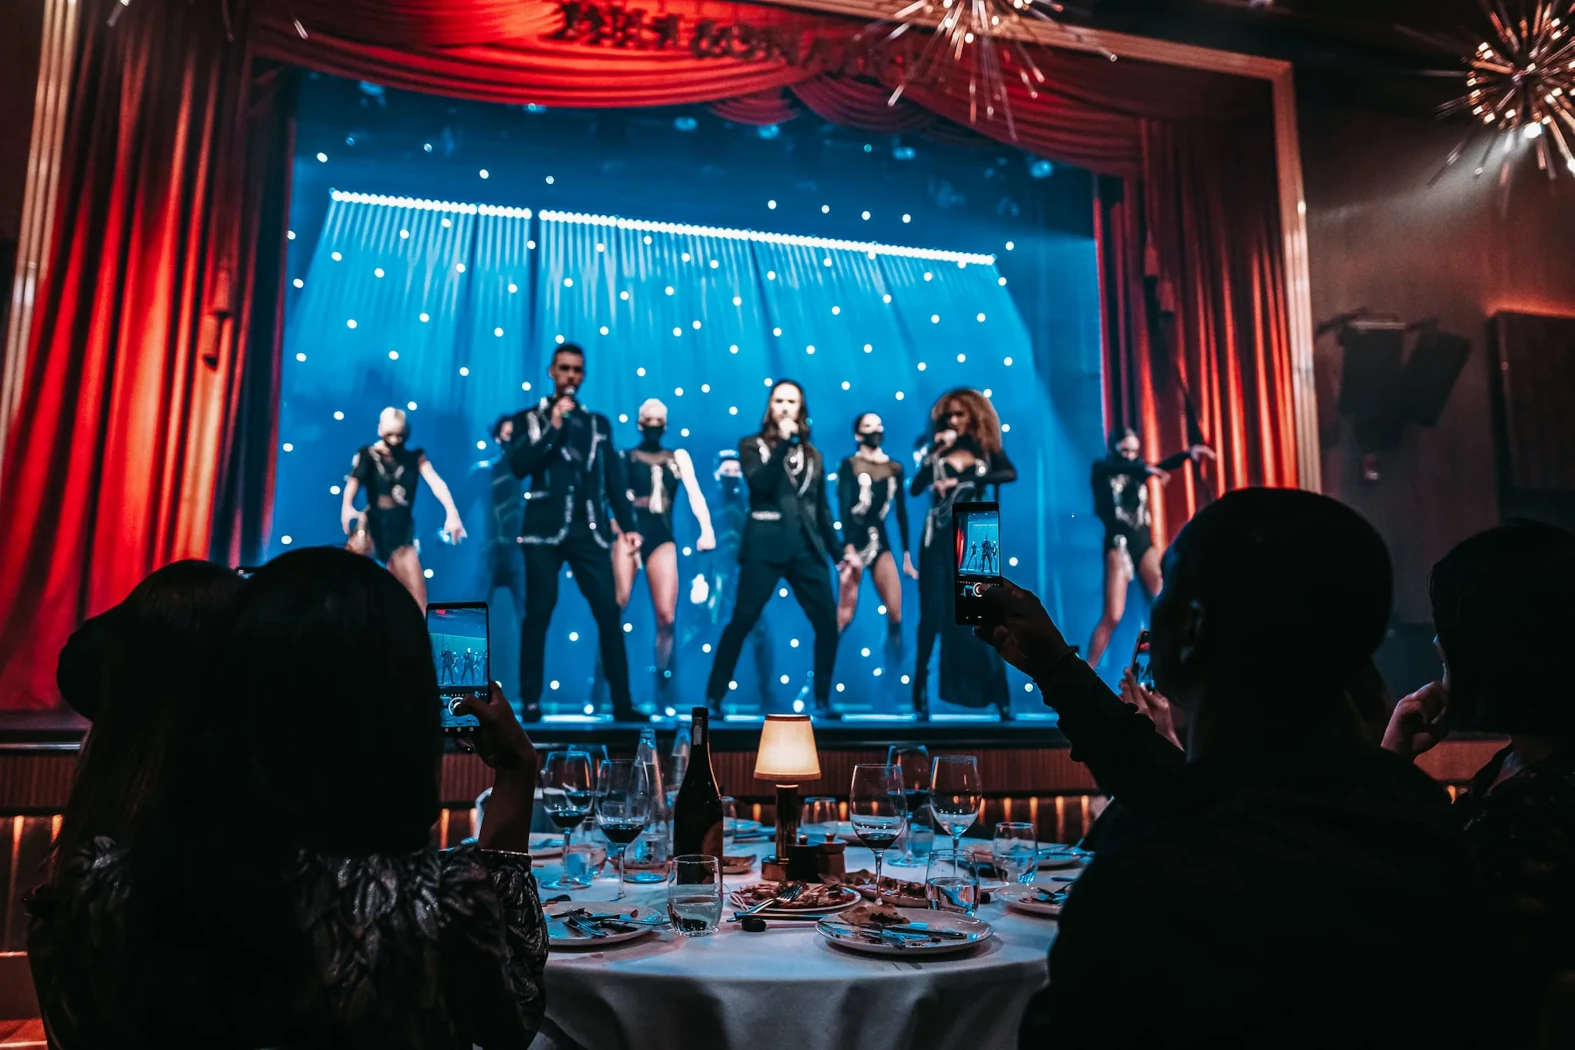 Live show with singers and dancers at Billionaire in Dubai.